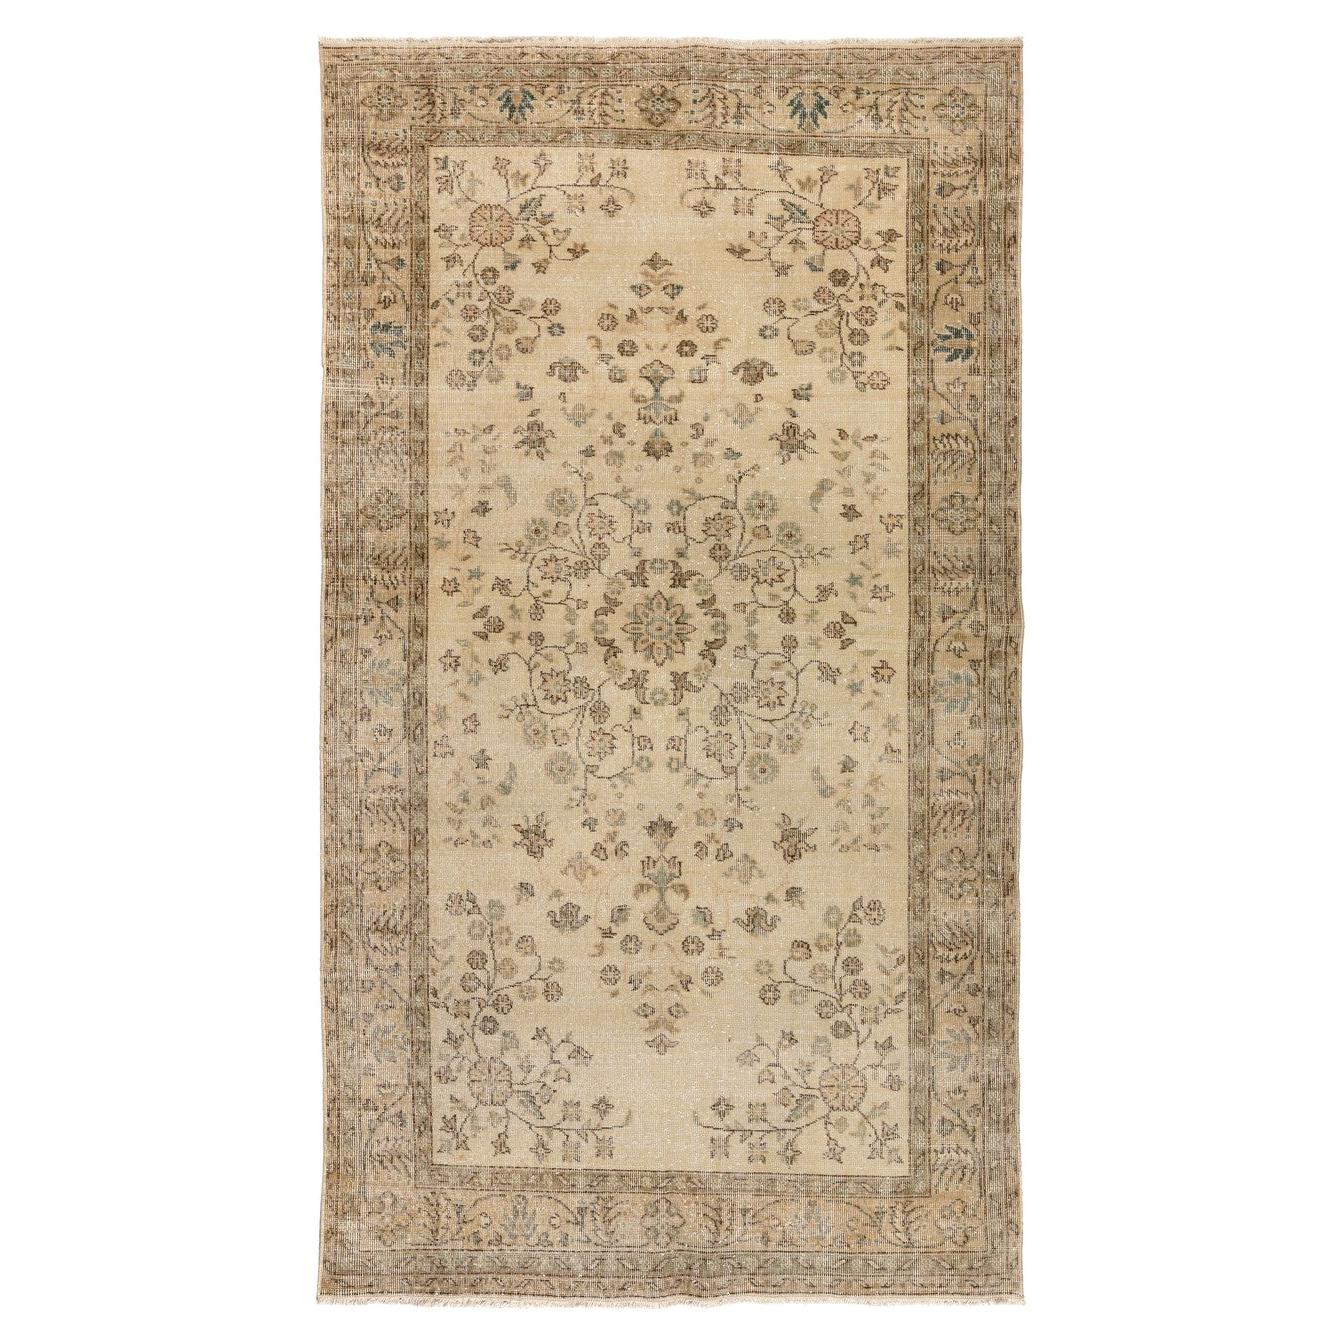 5.2x9 Ft Vintage Handmade Turkish Wool Area Rug in Muted colors on Beige ground For Sale